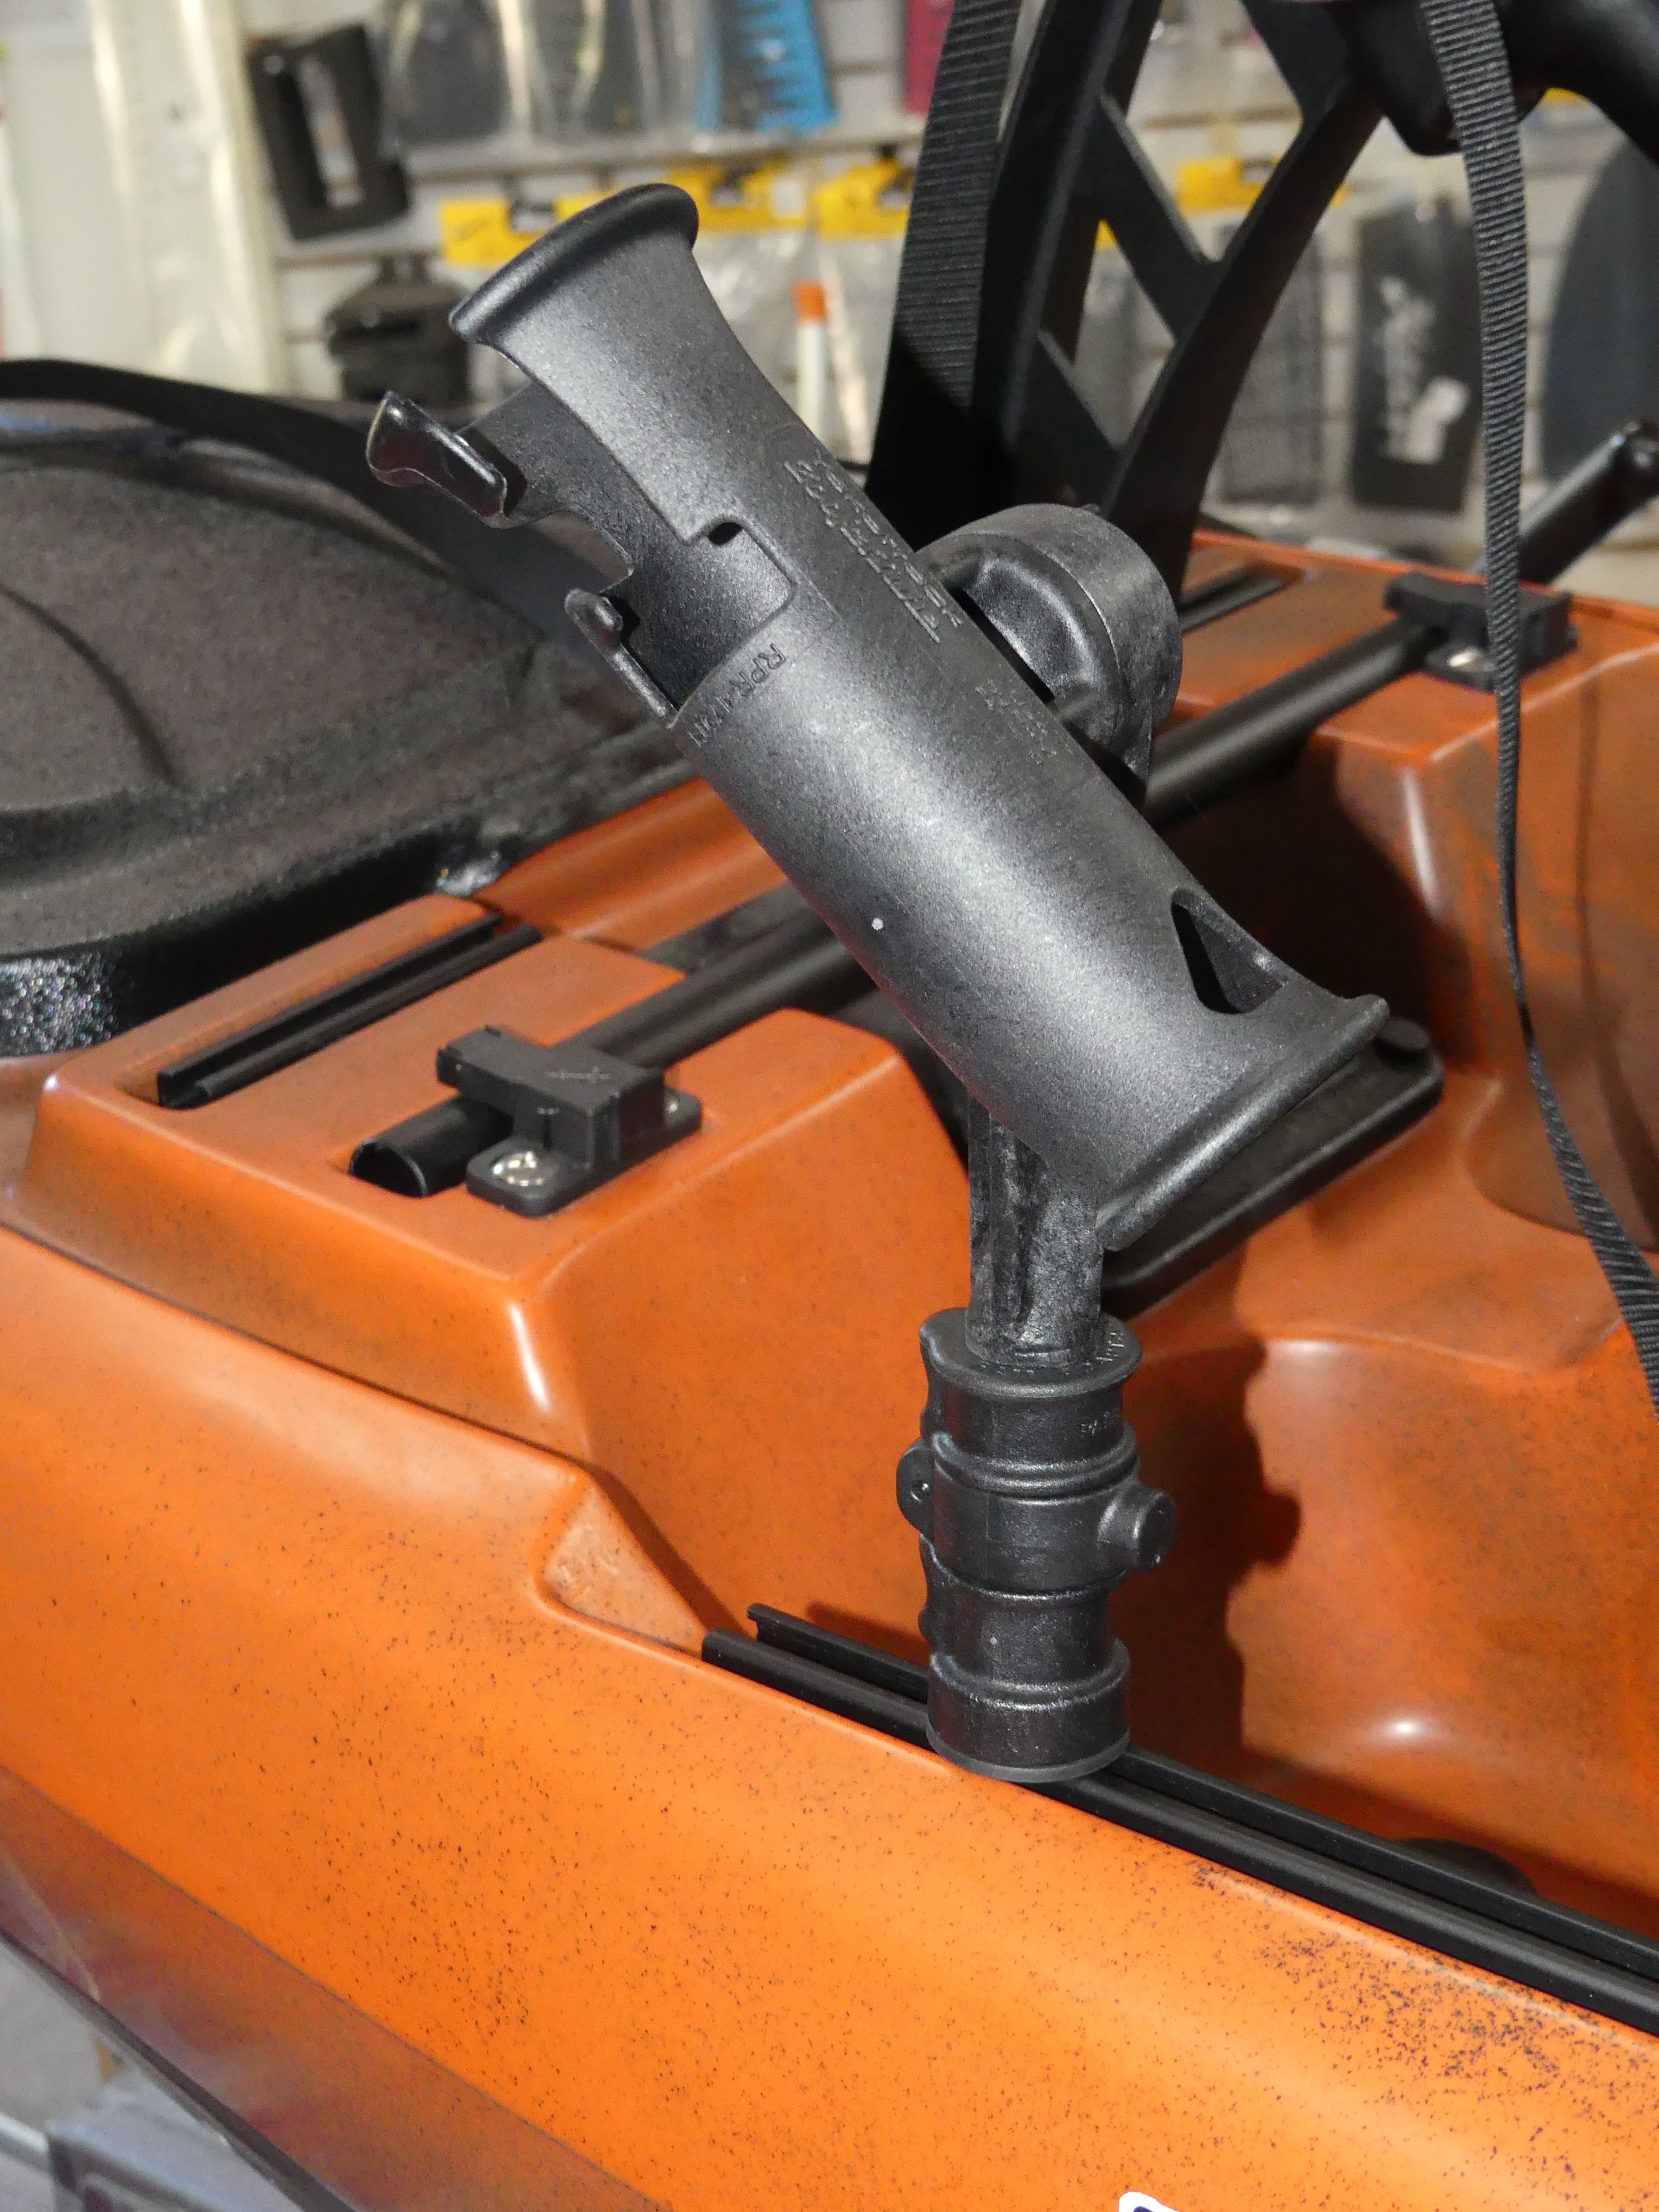 These are totally adjustable, and the tracks are good for not just rod holders, but for a wide range of additional kayak fishing gear that will fit the tracks.